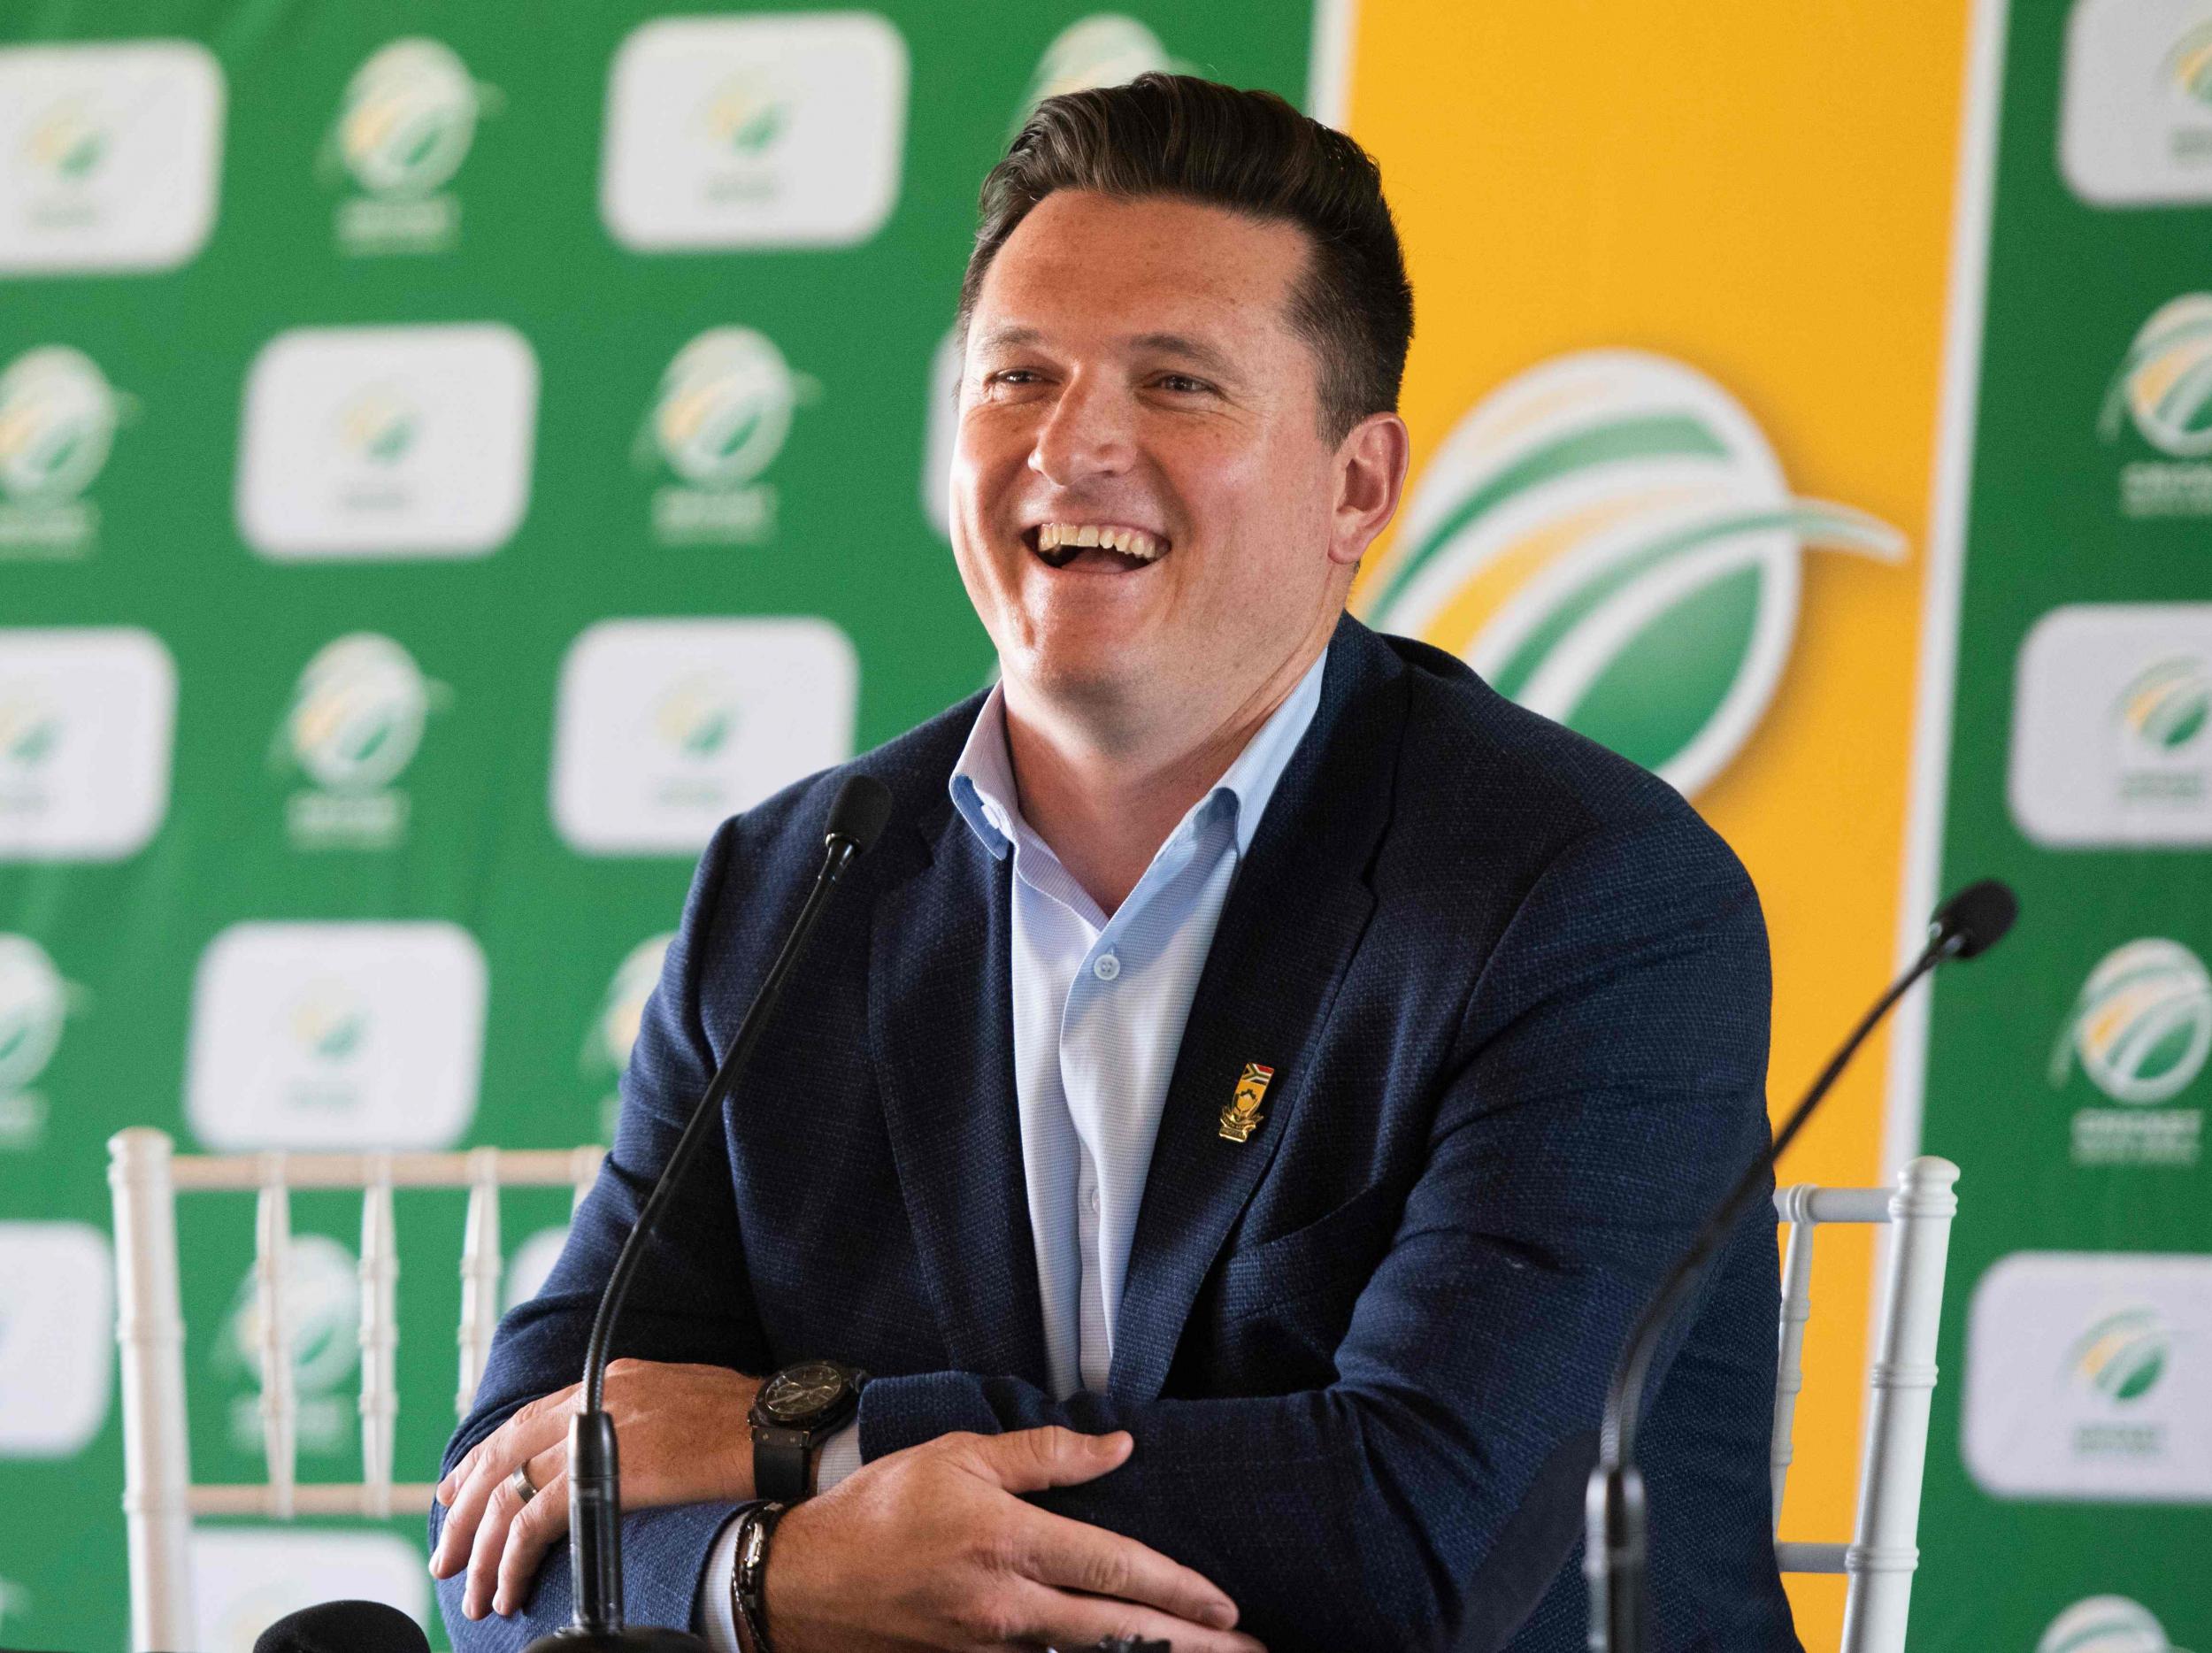 Graeme Smith was appointed acting director of cricket earlier this month